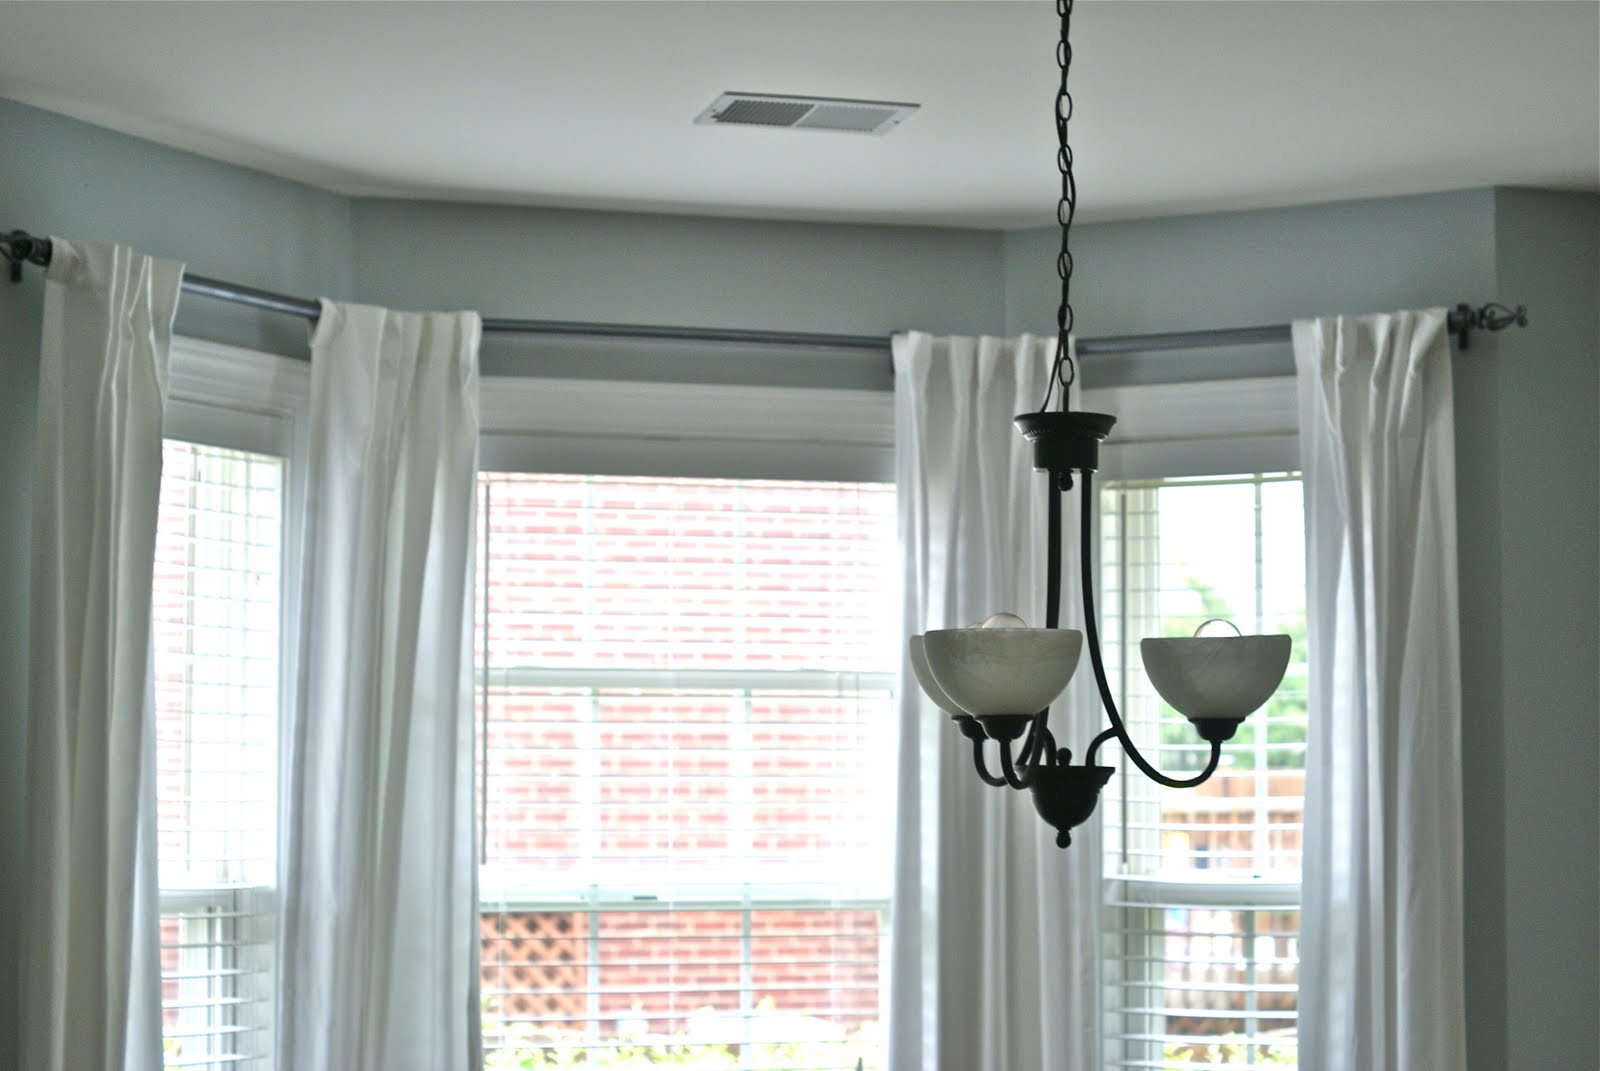 Step-by-Step Guide: How to Hang Curtains in a Bay Window